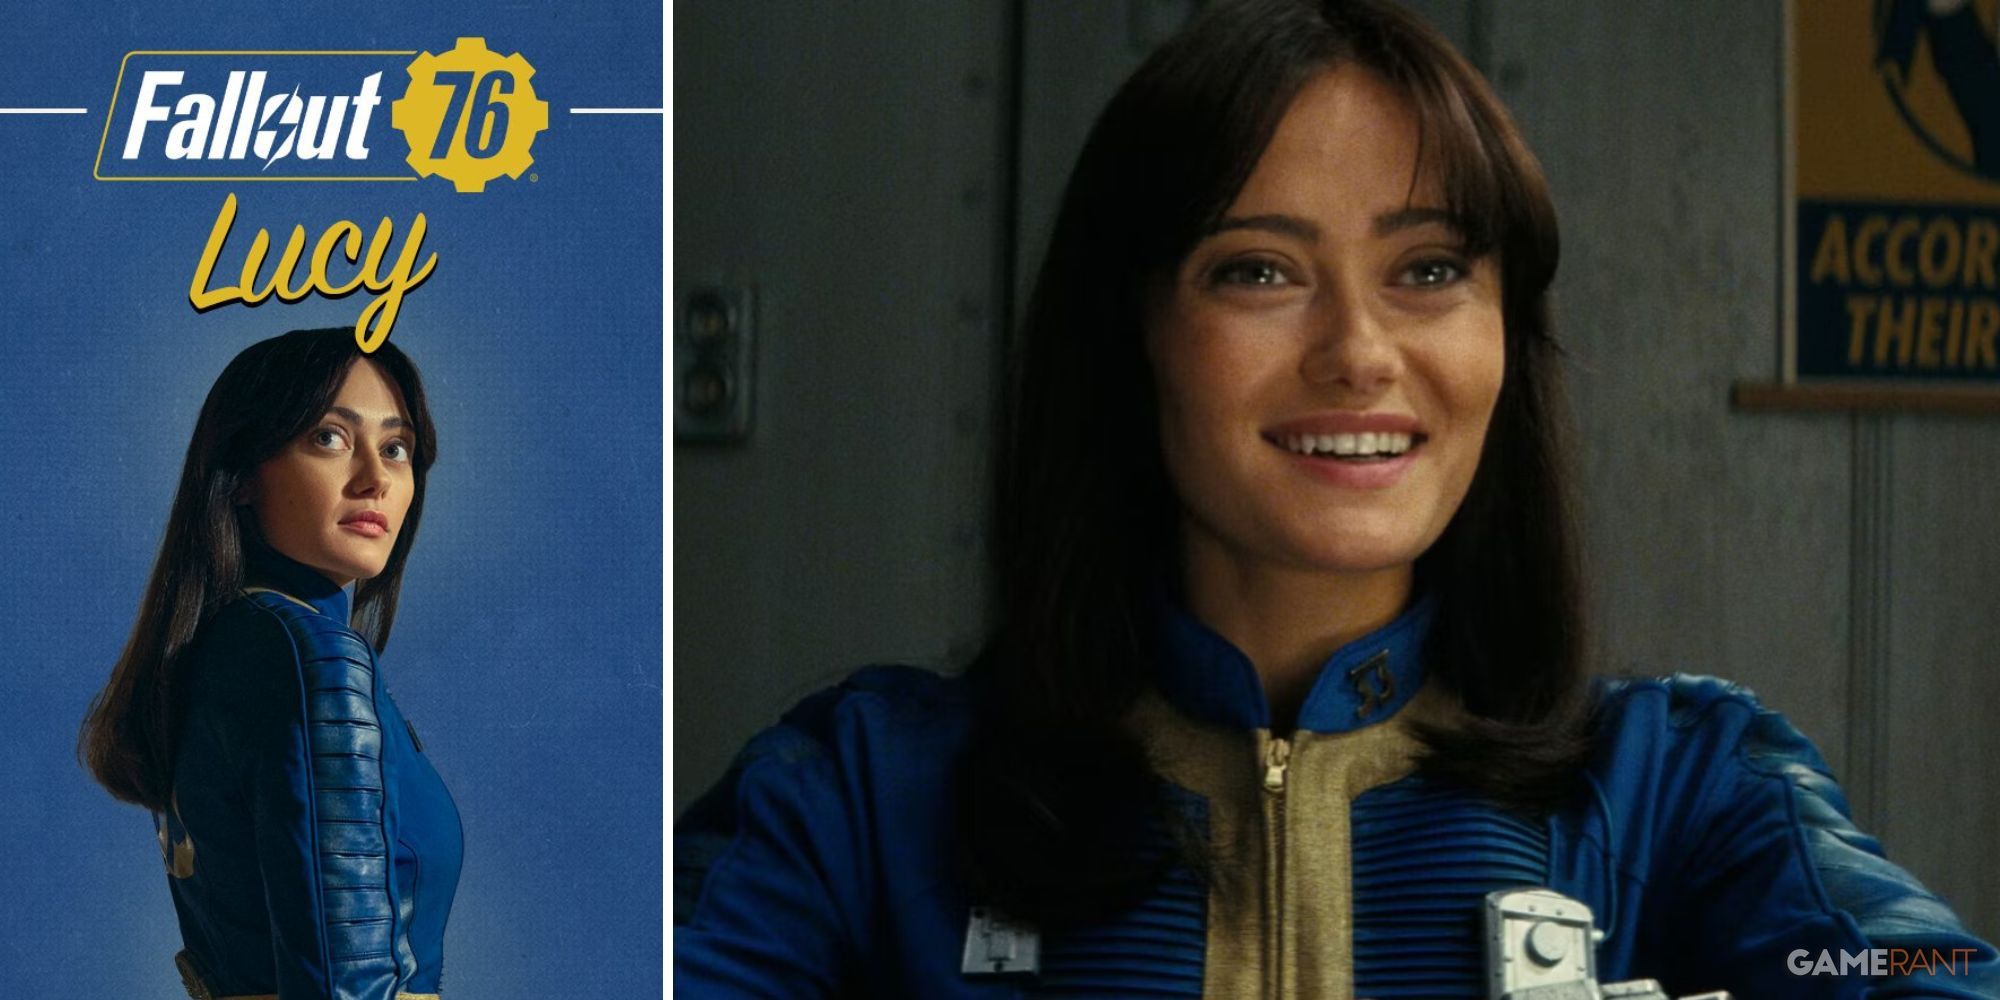 Fallout 76 - Lucy Split Image